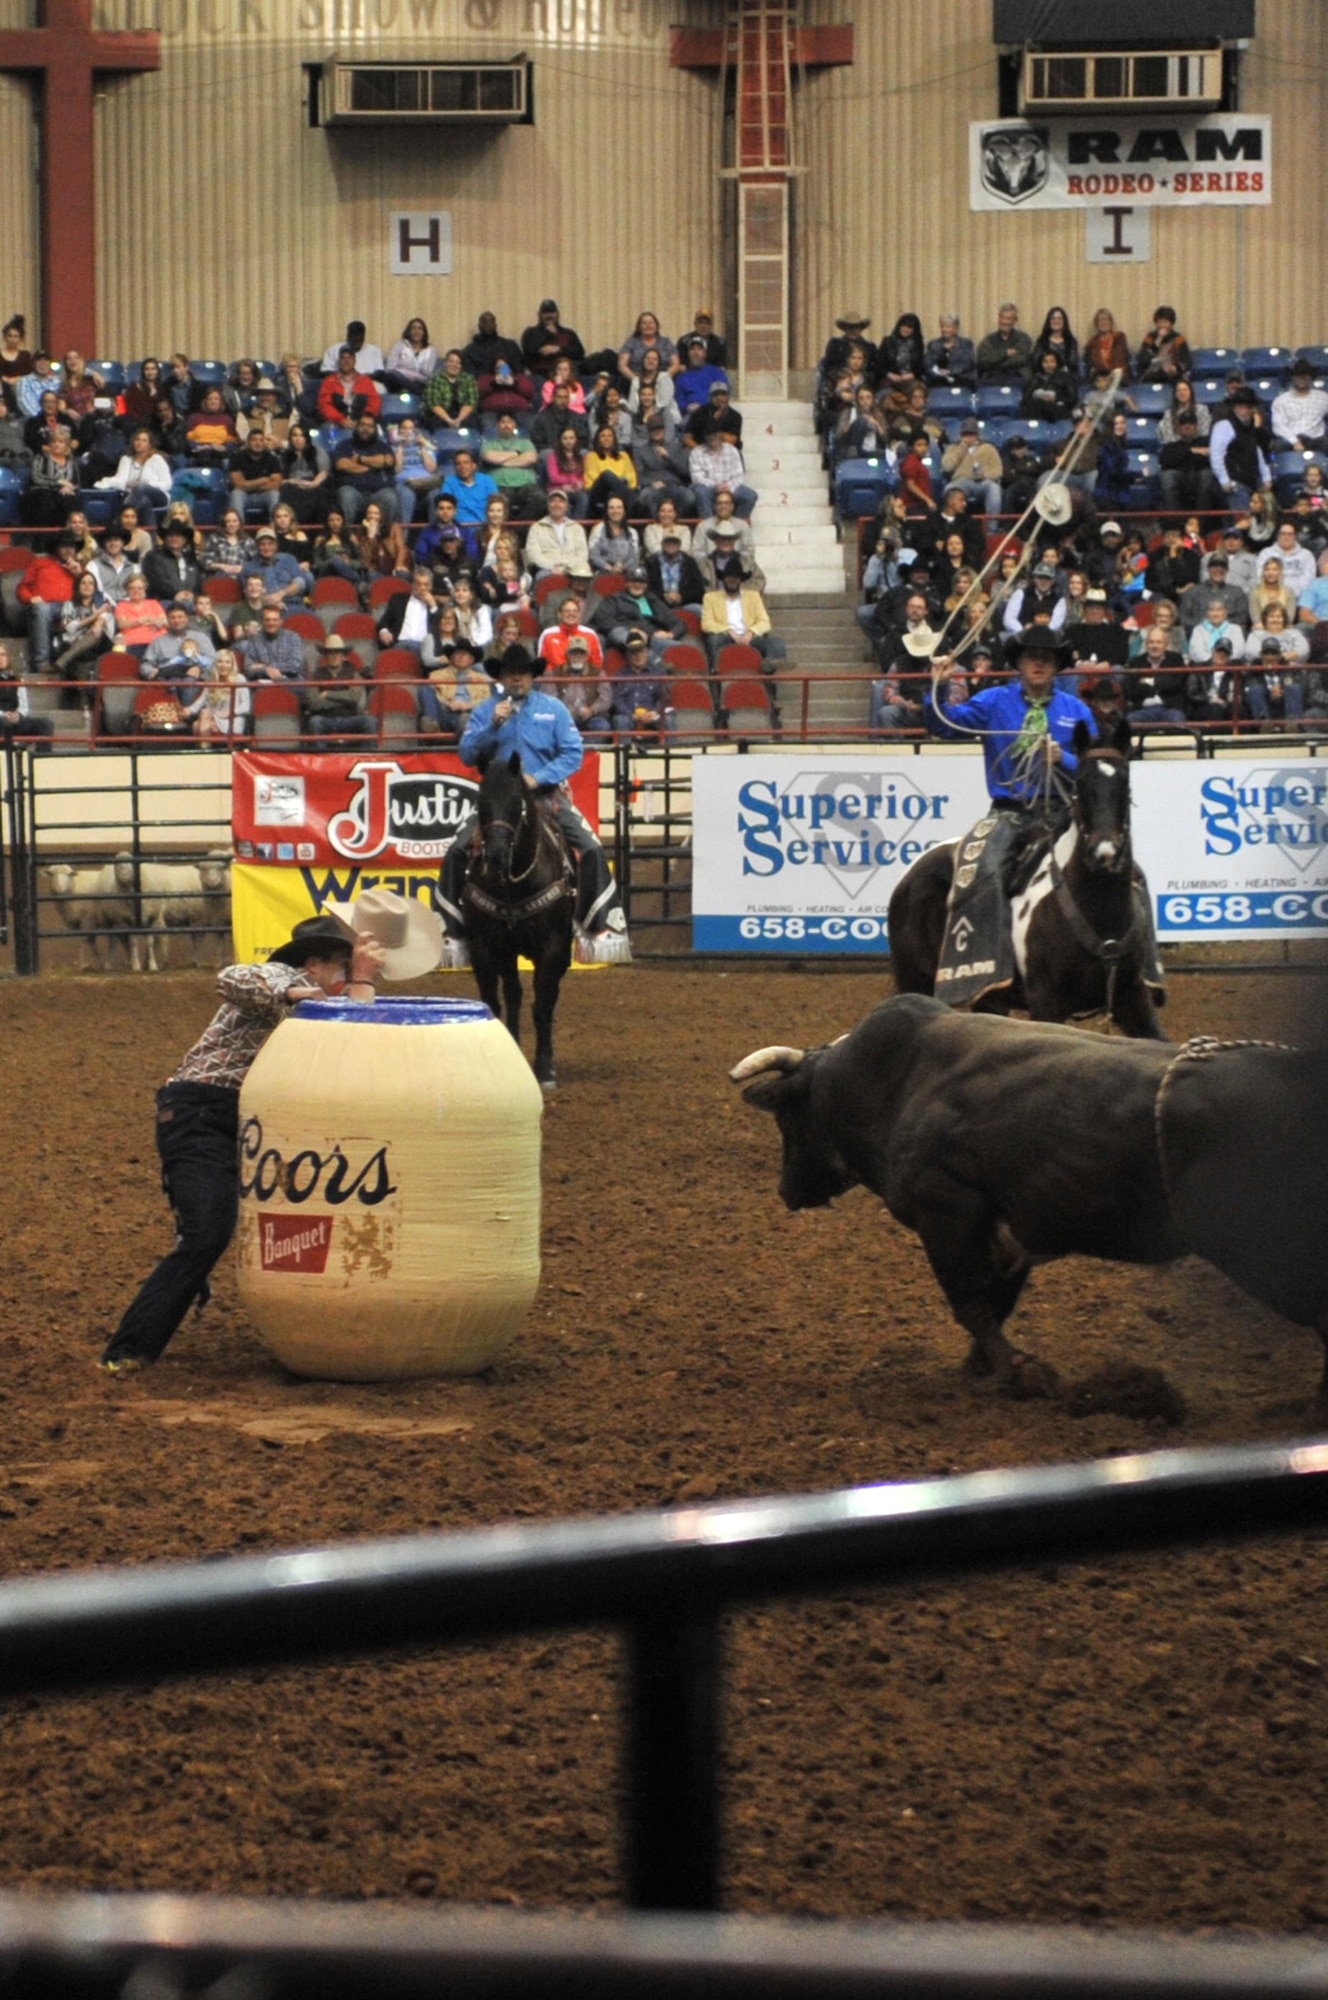 A bull gives the audience some additional entertainment during the 85th Annual San Angelo Stock Show and Rodeo Military Appreciation Night at the Foster Communications Coliseum in San Angelo, Texas, Feb. 15, 2017. Holding up the hat from inside the barrel is rodeo clown Justin Rumford. (U.S. Air Force photo by Staff Sgt. Laura R. McFarlane/Released)